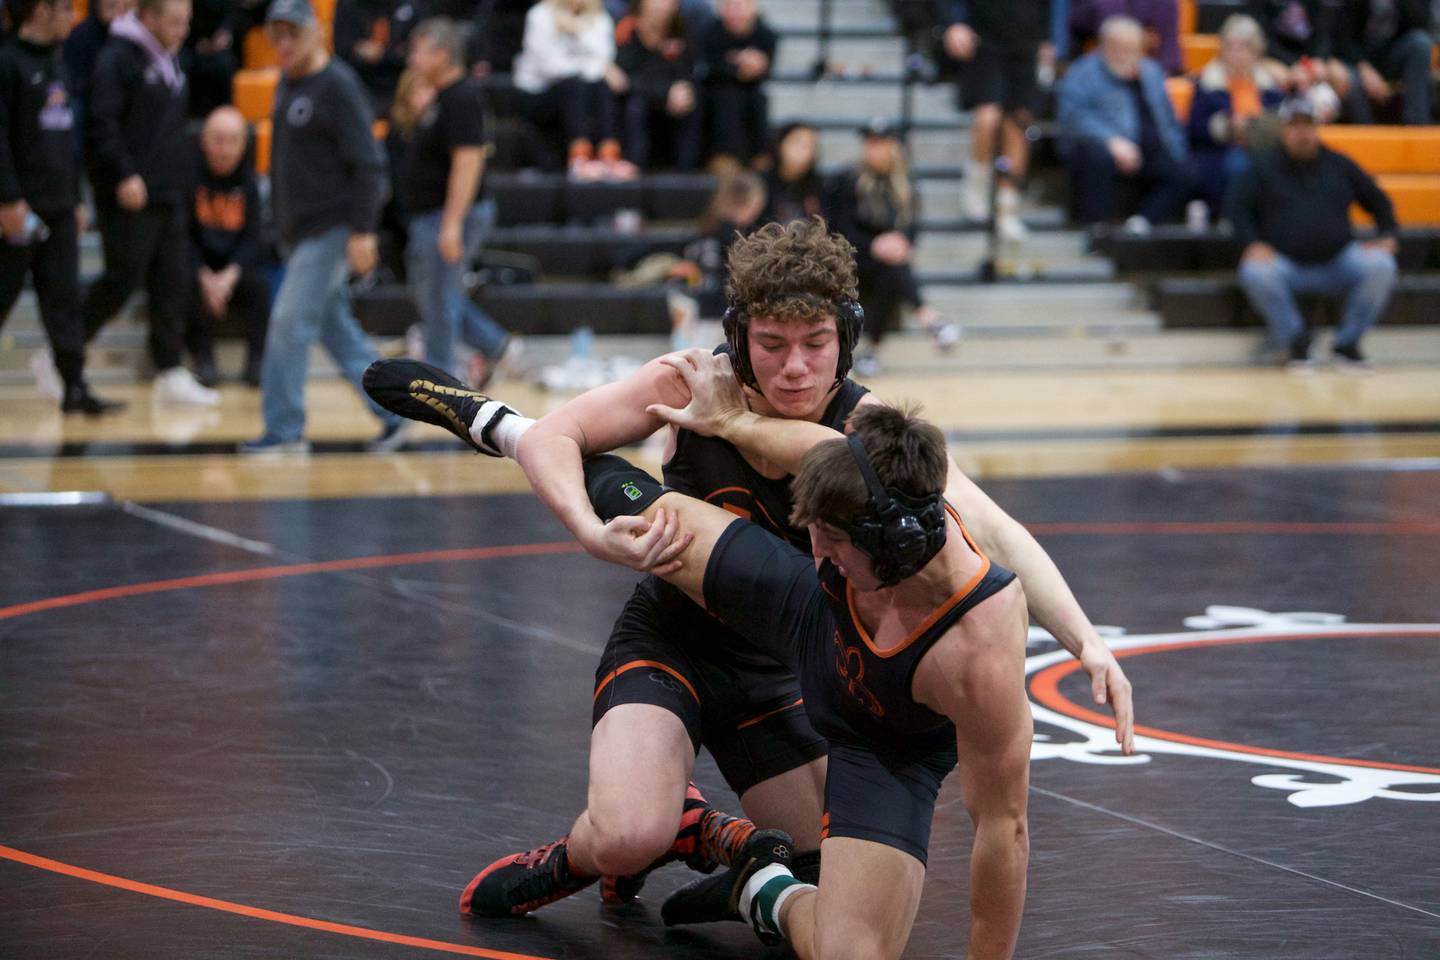 St. Charles East's Brody Murray and Libertyville's Matt Kubas compete in the 175 lb. class at the St. Charles East wrestling meet on Saturday, Dec.2, 2023 in St. Charles.